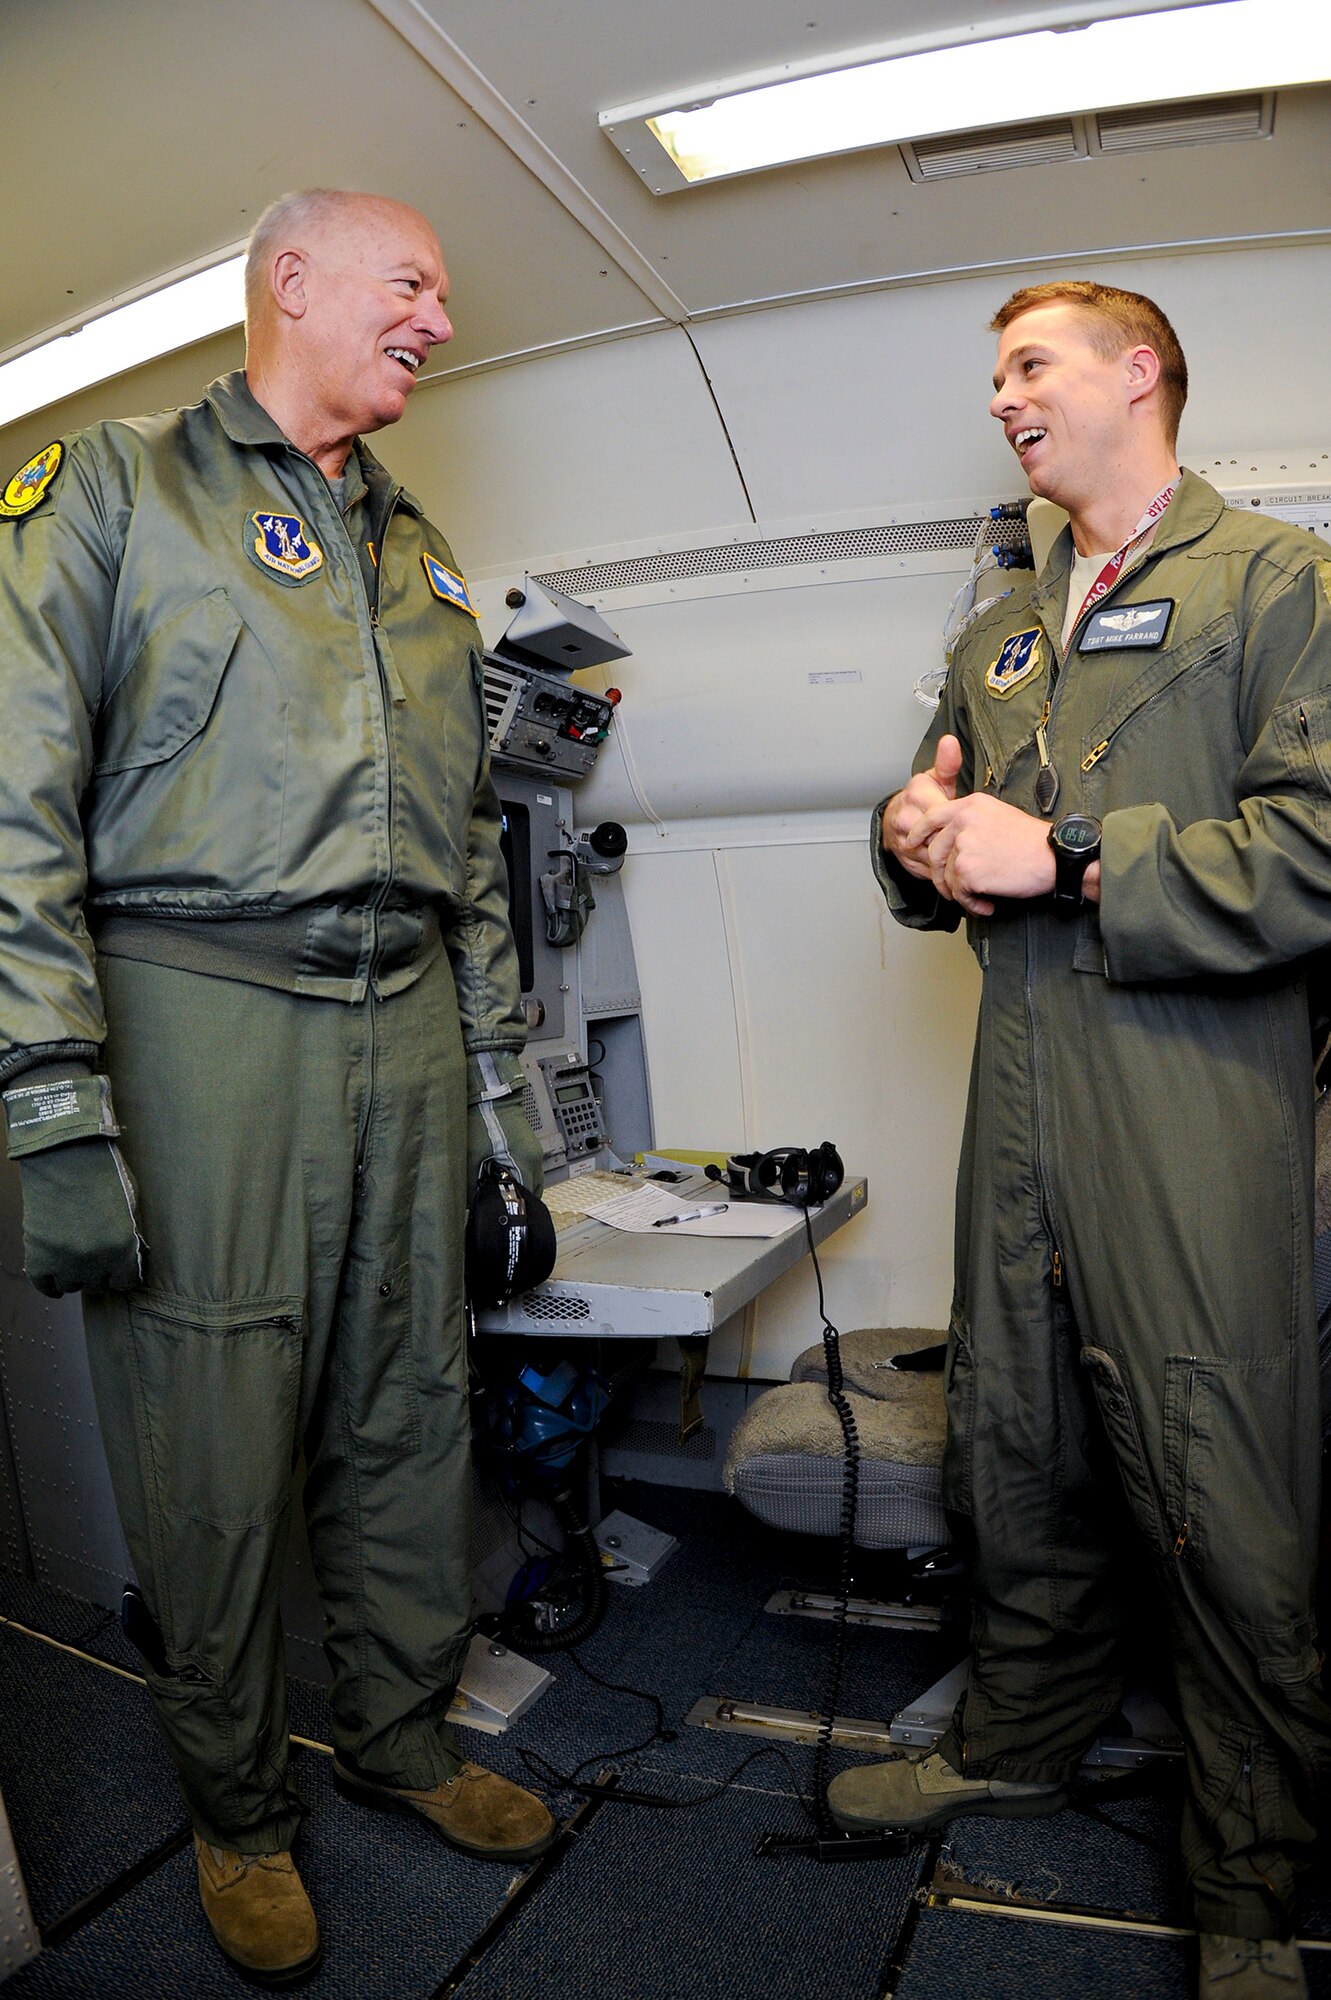 Lt. Gen. Harry Wyatt III, left, Air National Guard (ANG) director, talks with ANG Tech. Sgt. Mike Farrand, E-8 Joint STARS (JSTARS) crewmember, during an orientation flight, Robins Air Force Base, Ga., Dec. 05, 2011.  Wyatt went on the flight to learn more about the capabilities of the JSTARS weapon system.
(National Guard photo by Master Sgt. Roger Parsons/Released)
